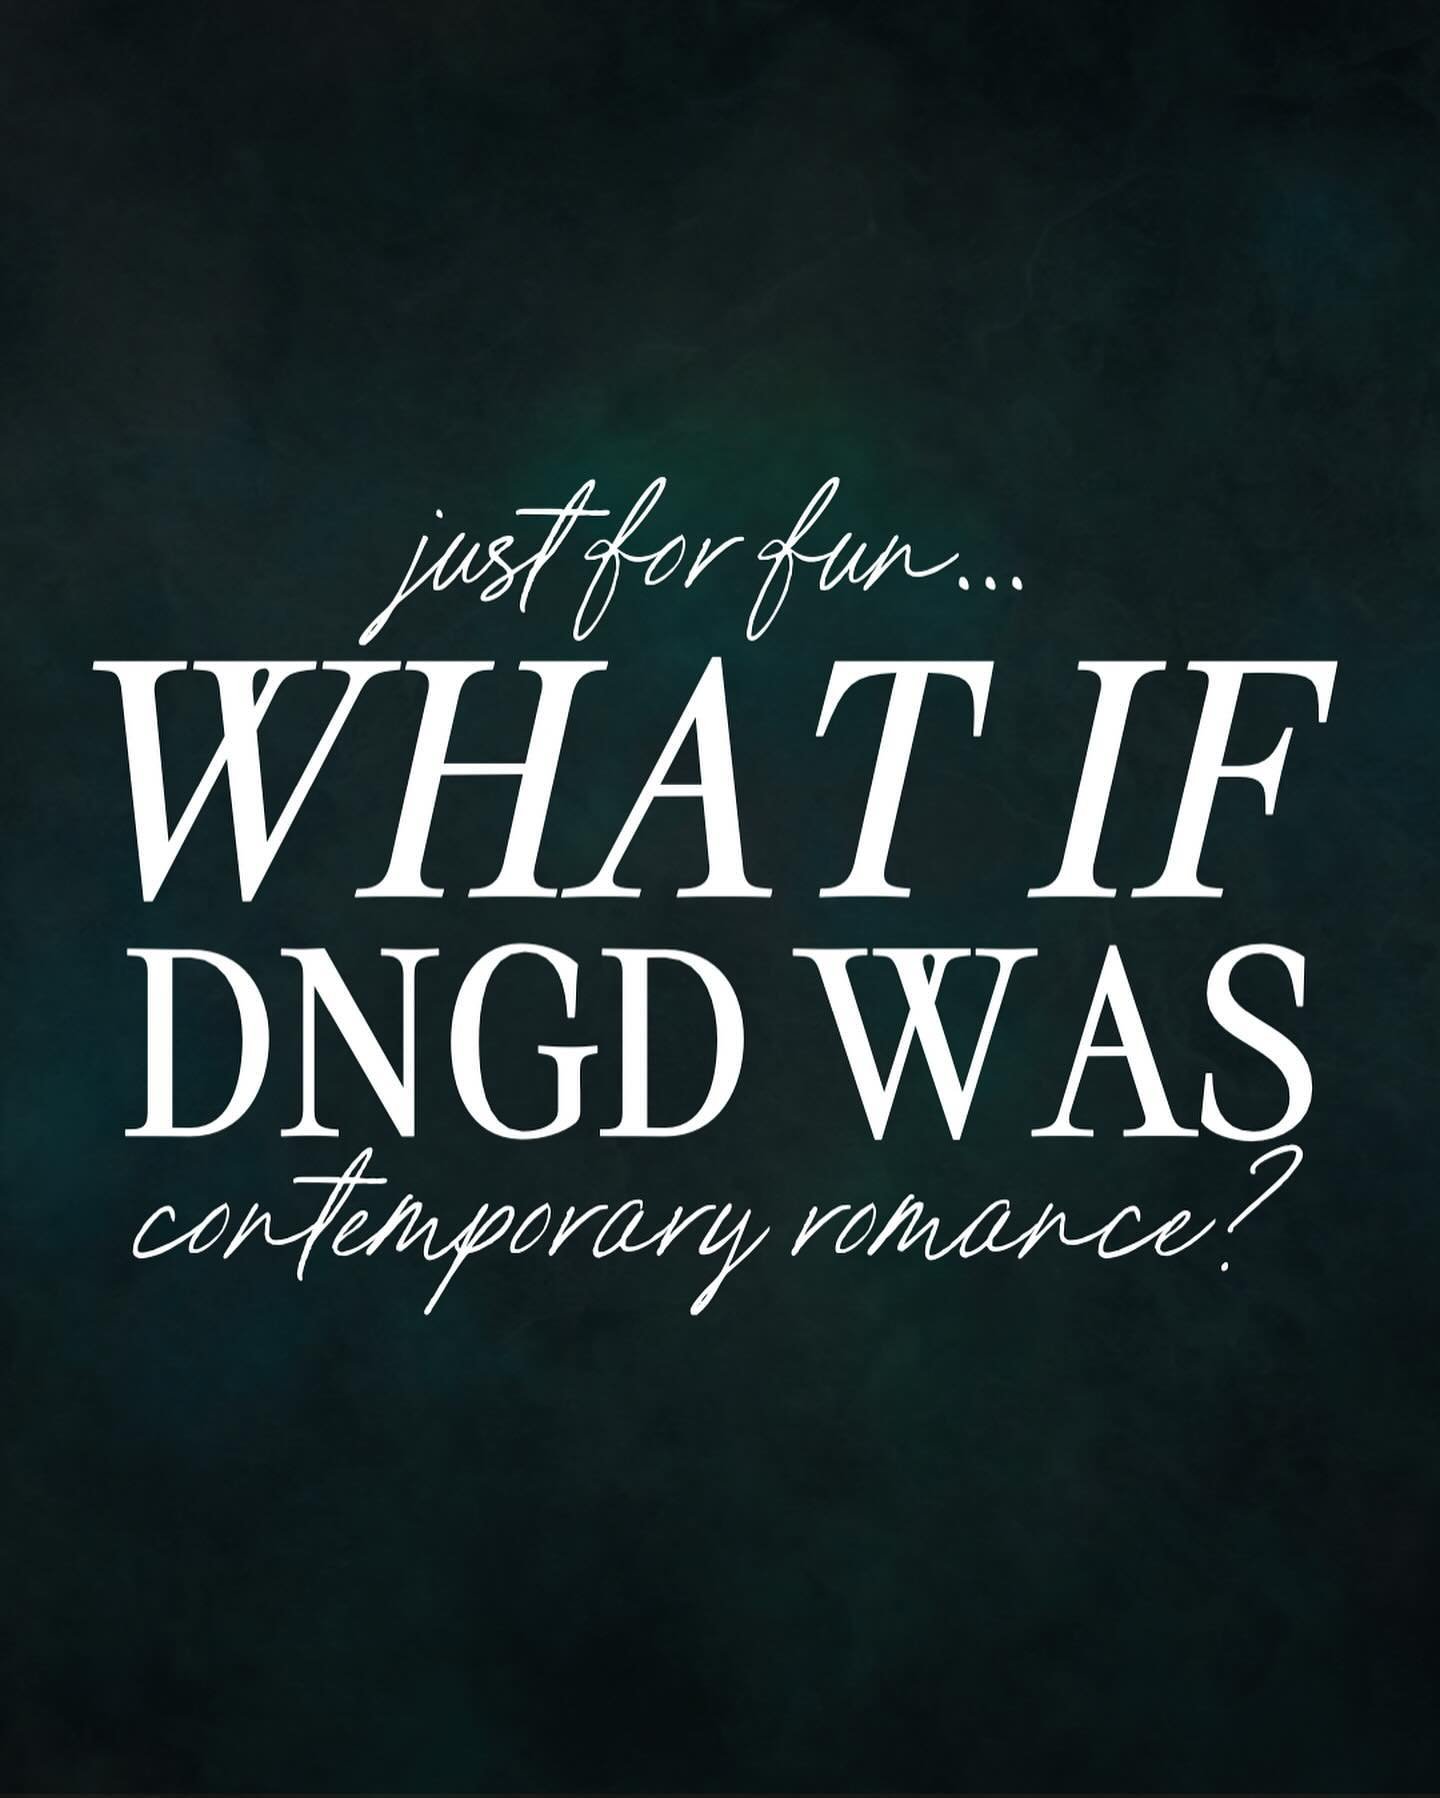 If you&rsquo;ve been here a while, you&rsquo;ve already seen this, but I thought it would be fun to bring it back today and let you tell me what would happen if DNGD was a contemporary AU&hellip; go wild my lovelies&mdash;give it the Hallmark treatme